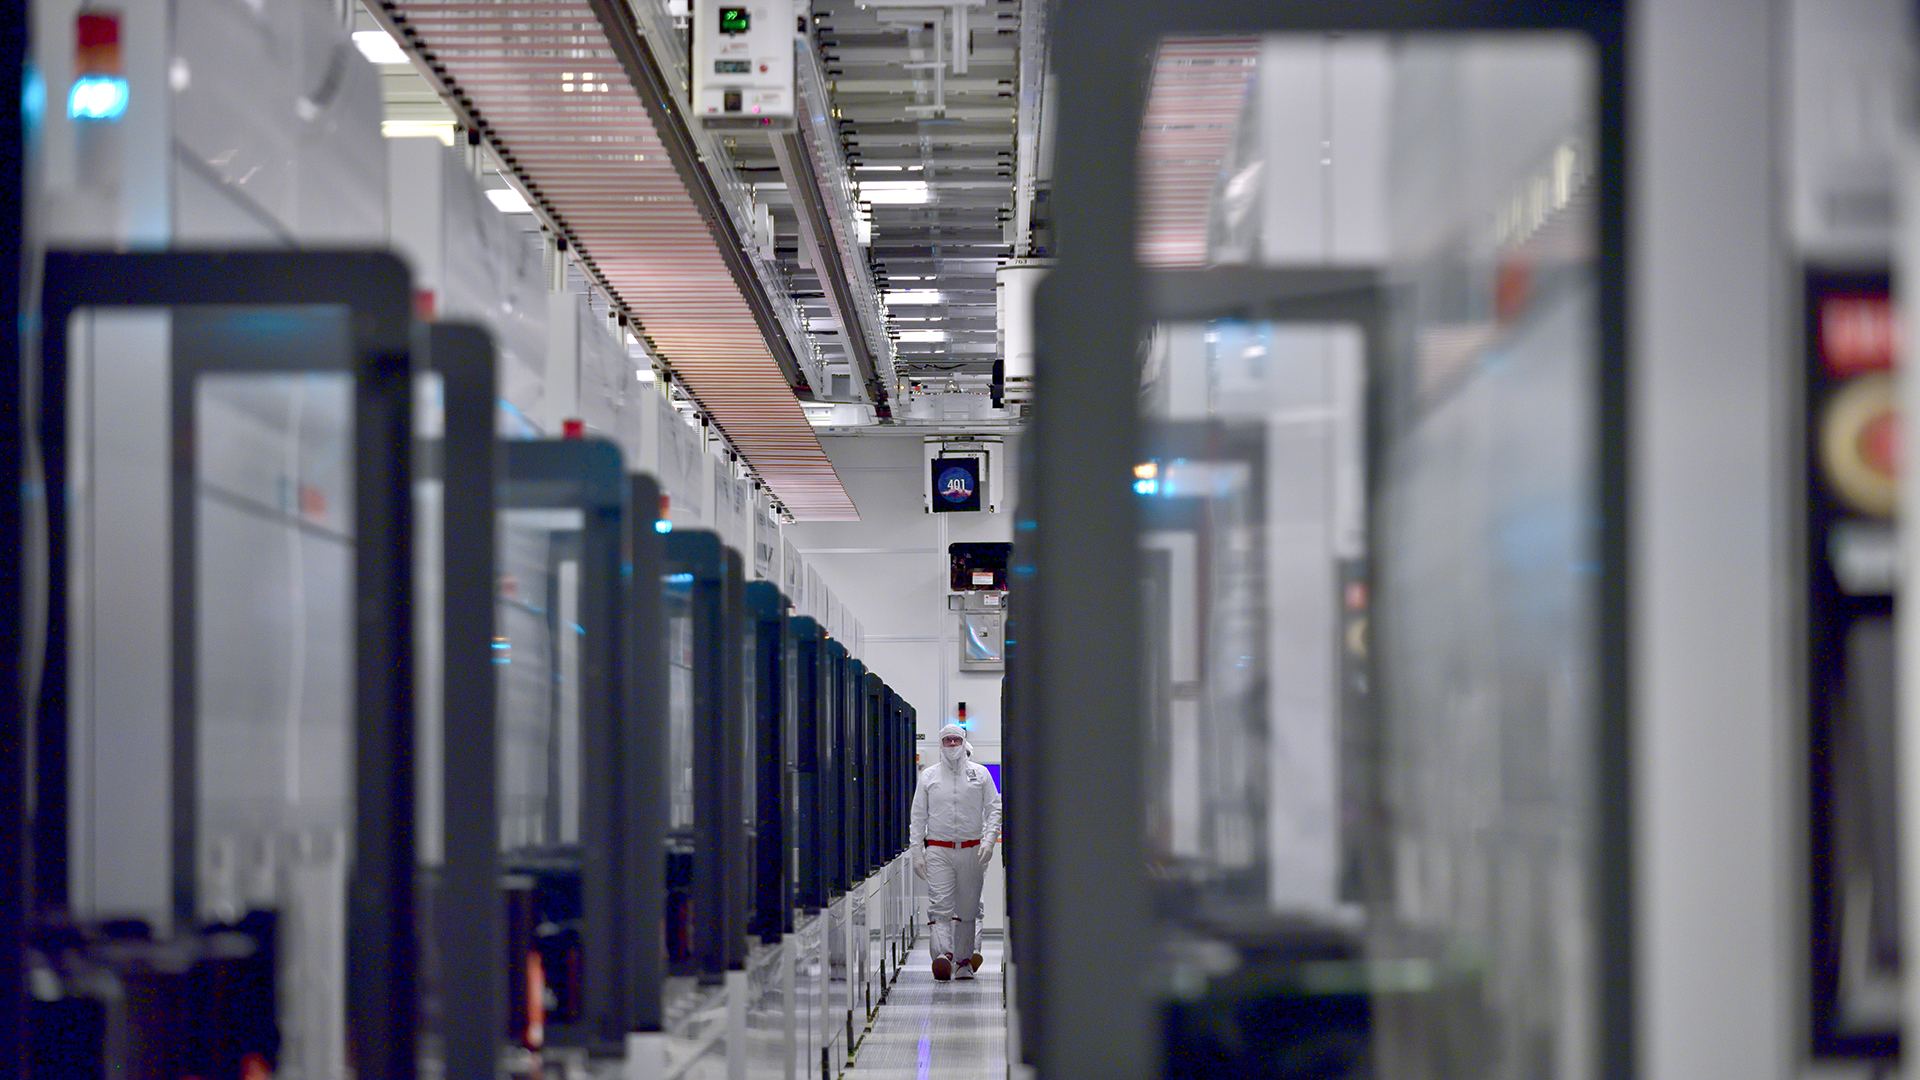 Intel production and cleanroom facilities